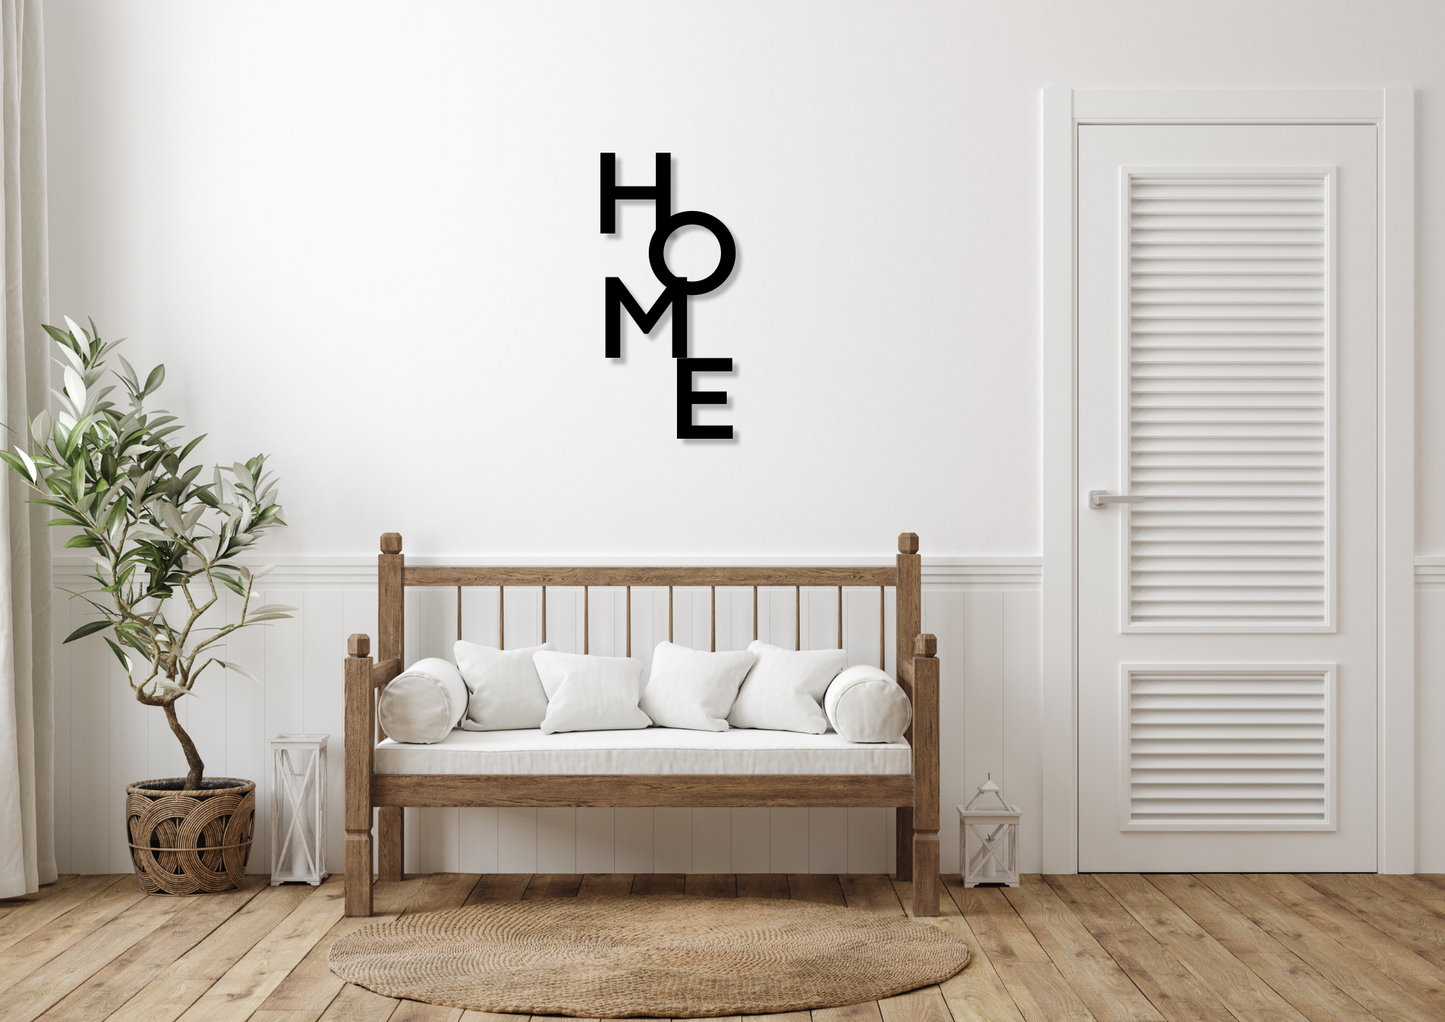 Lettering "HOME" made of wood/wall decoration/decor for the hallway/wall decoration made of wood/decor entrance area